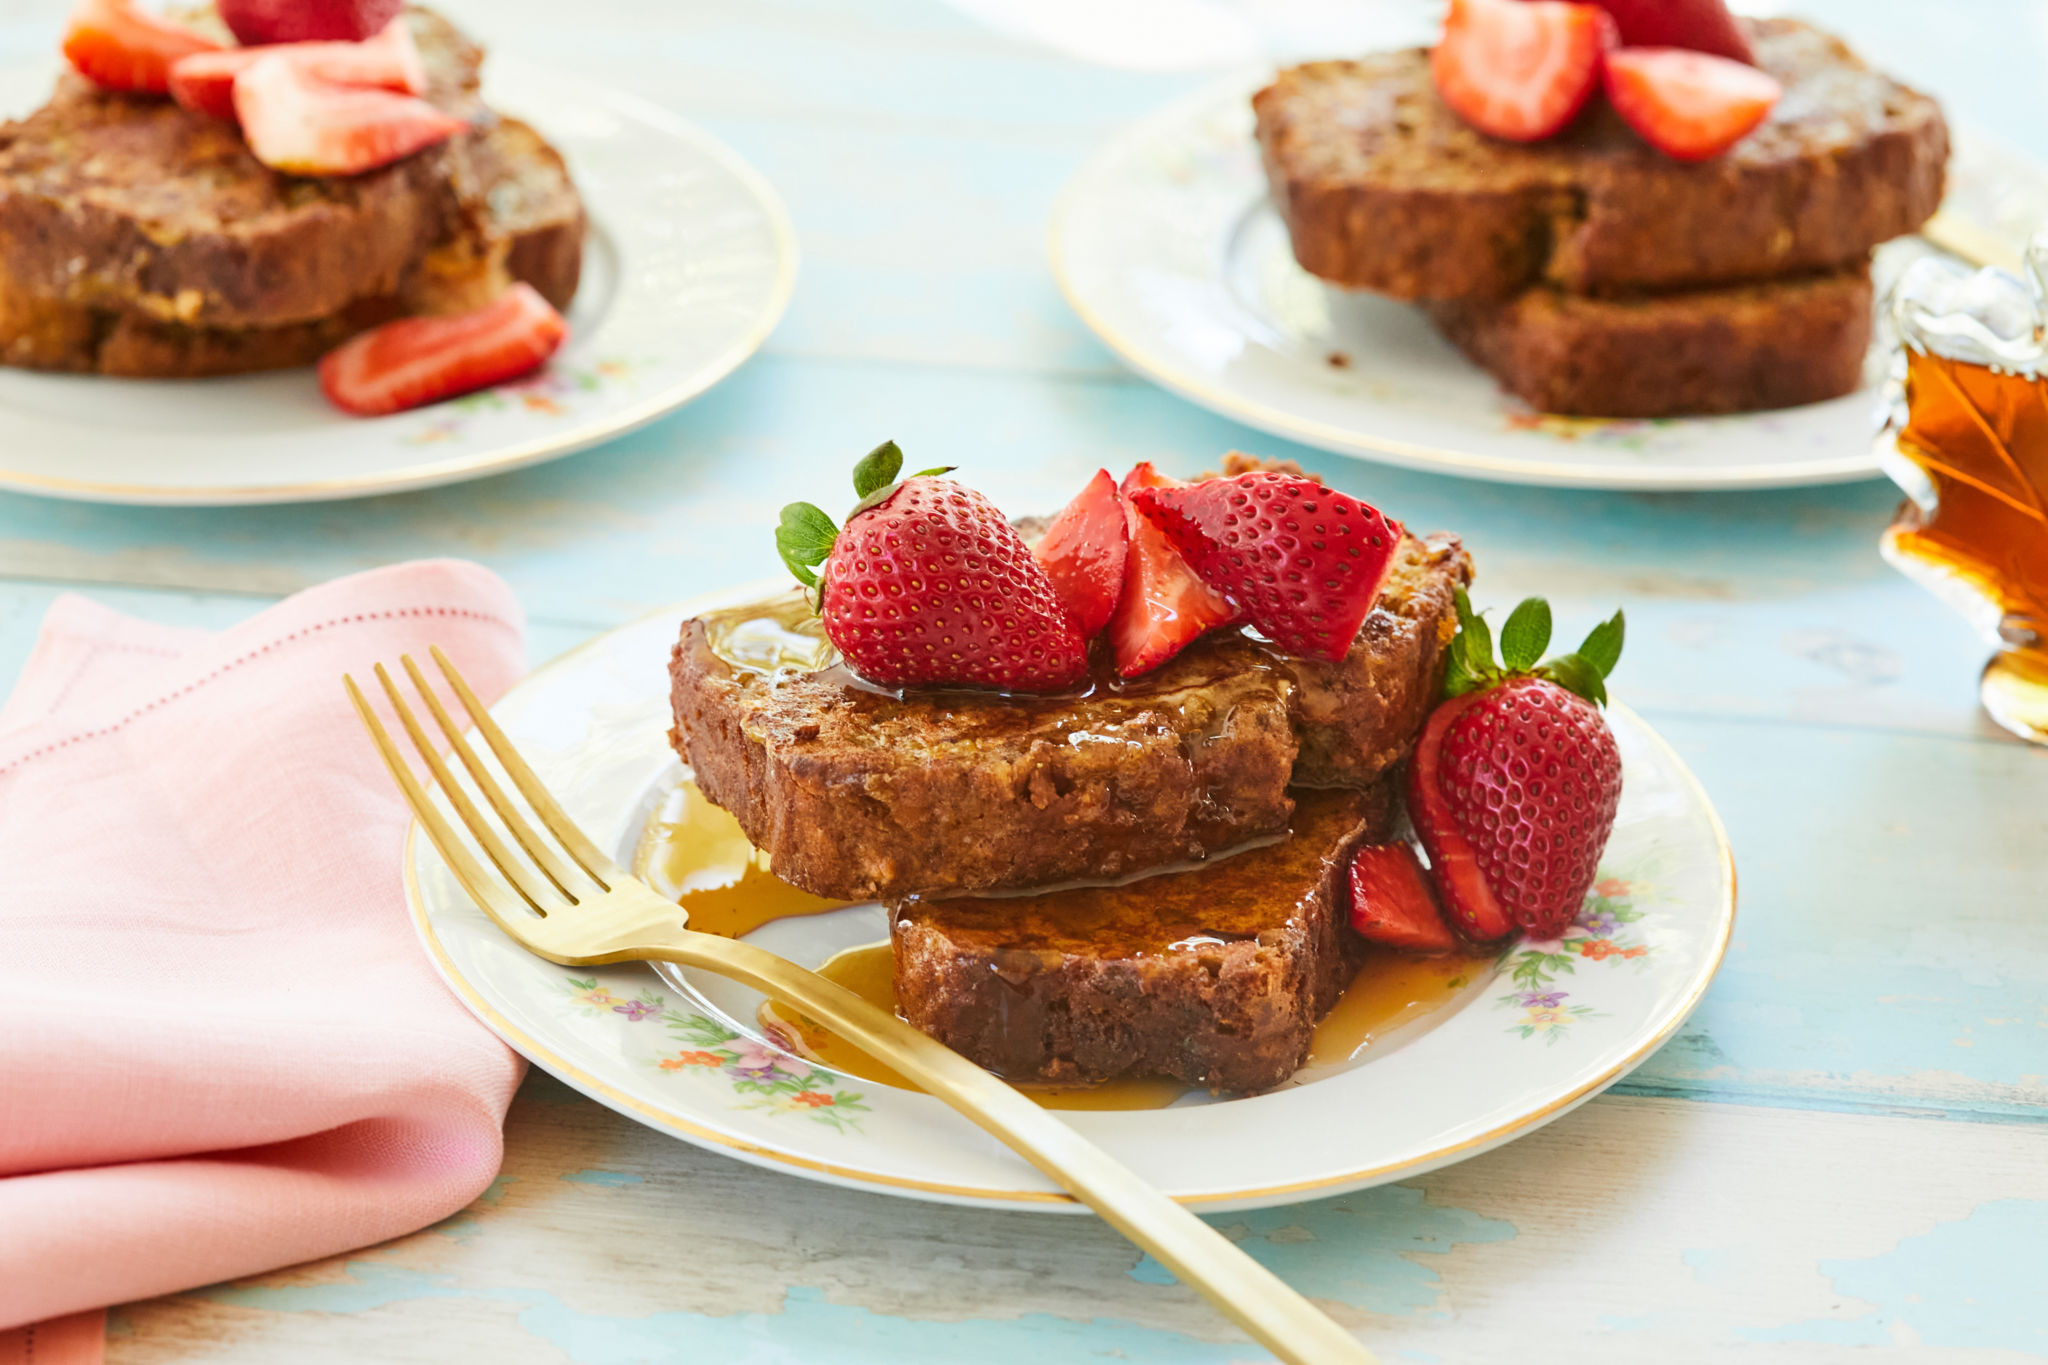 Plates of Banana Bread French Toast topped with syrup and strawberries.